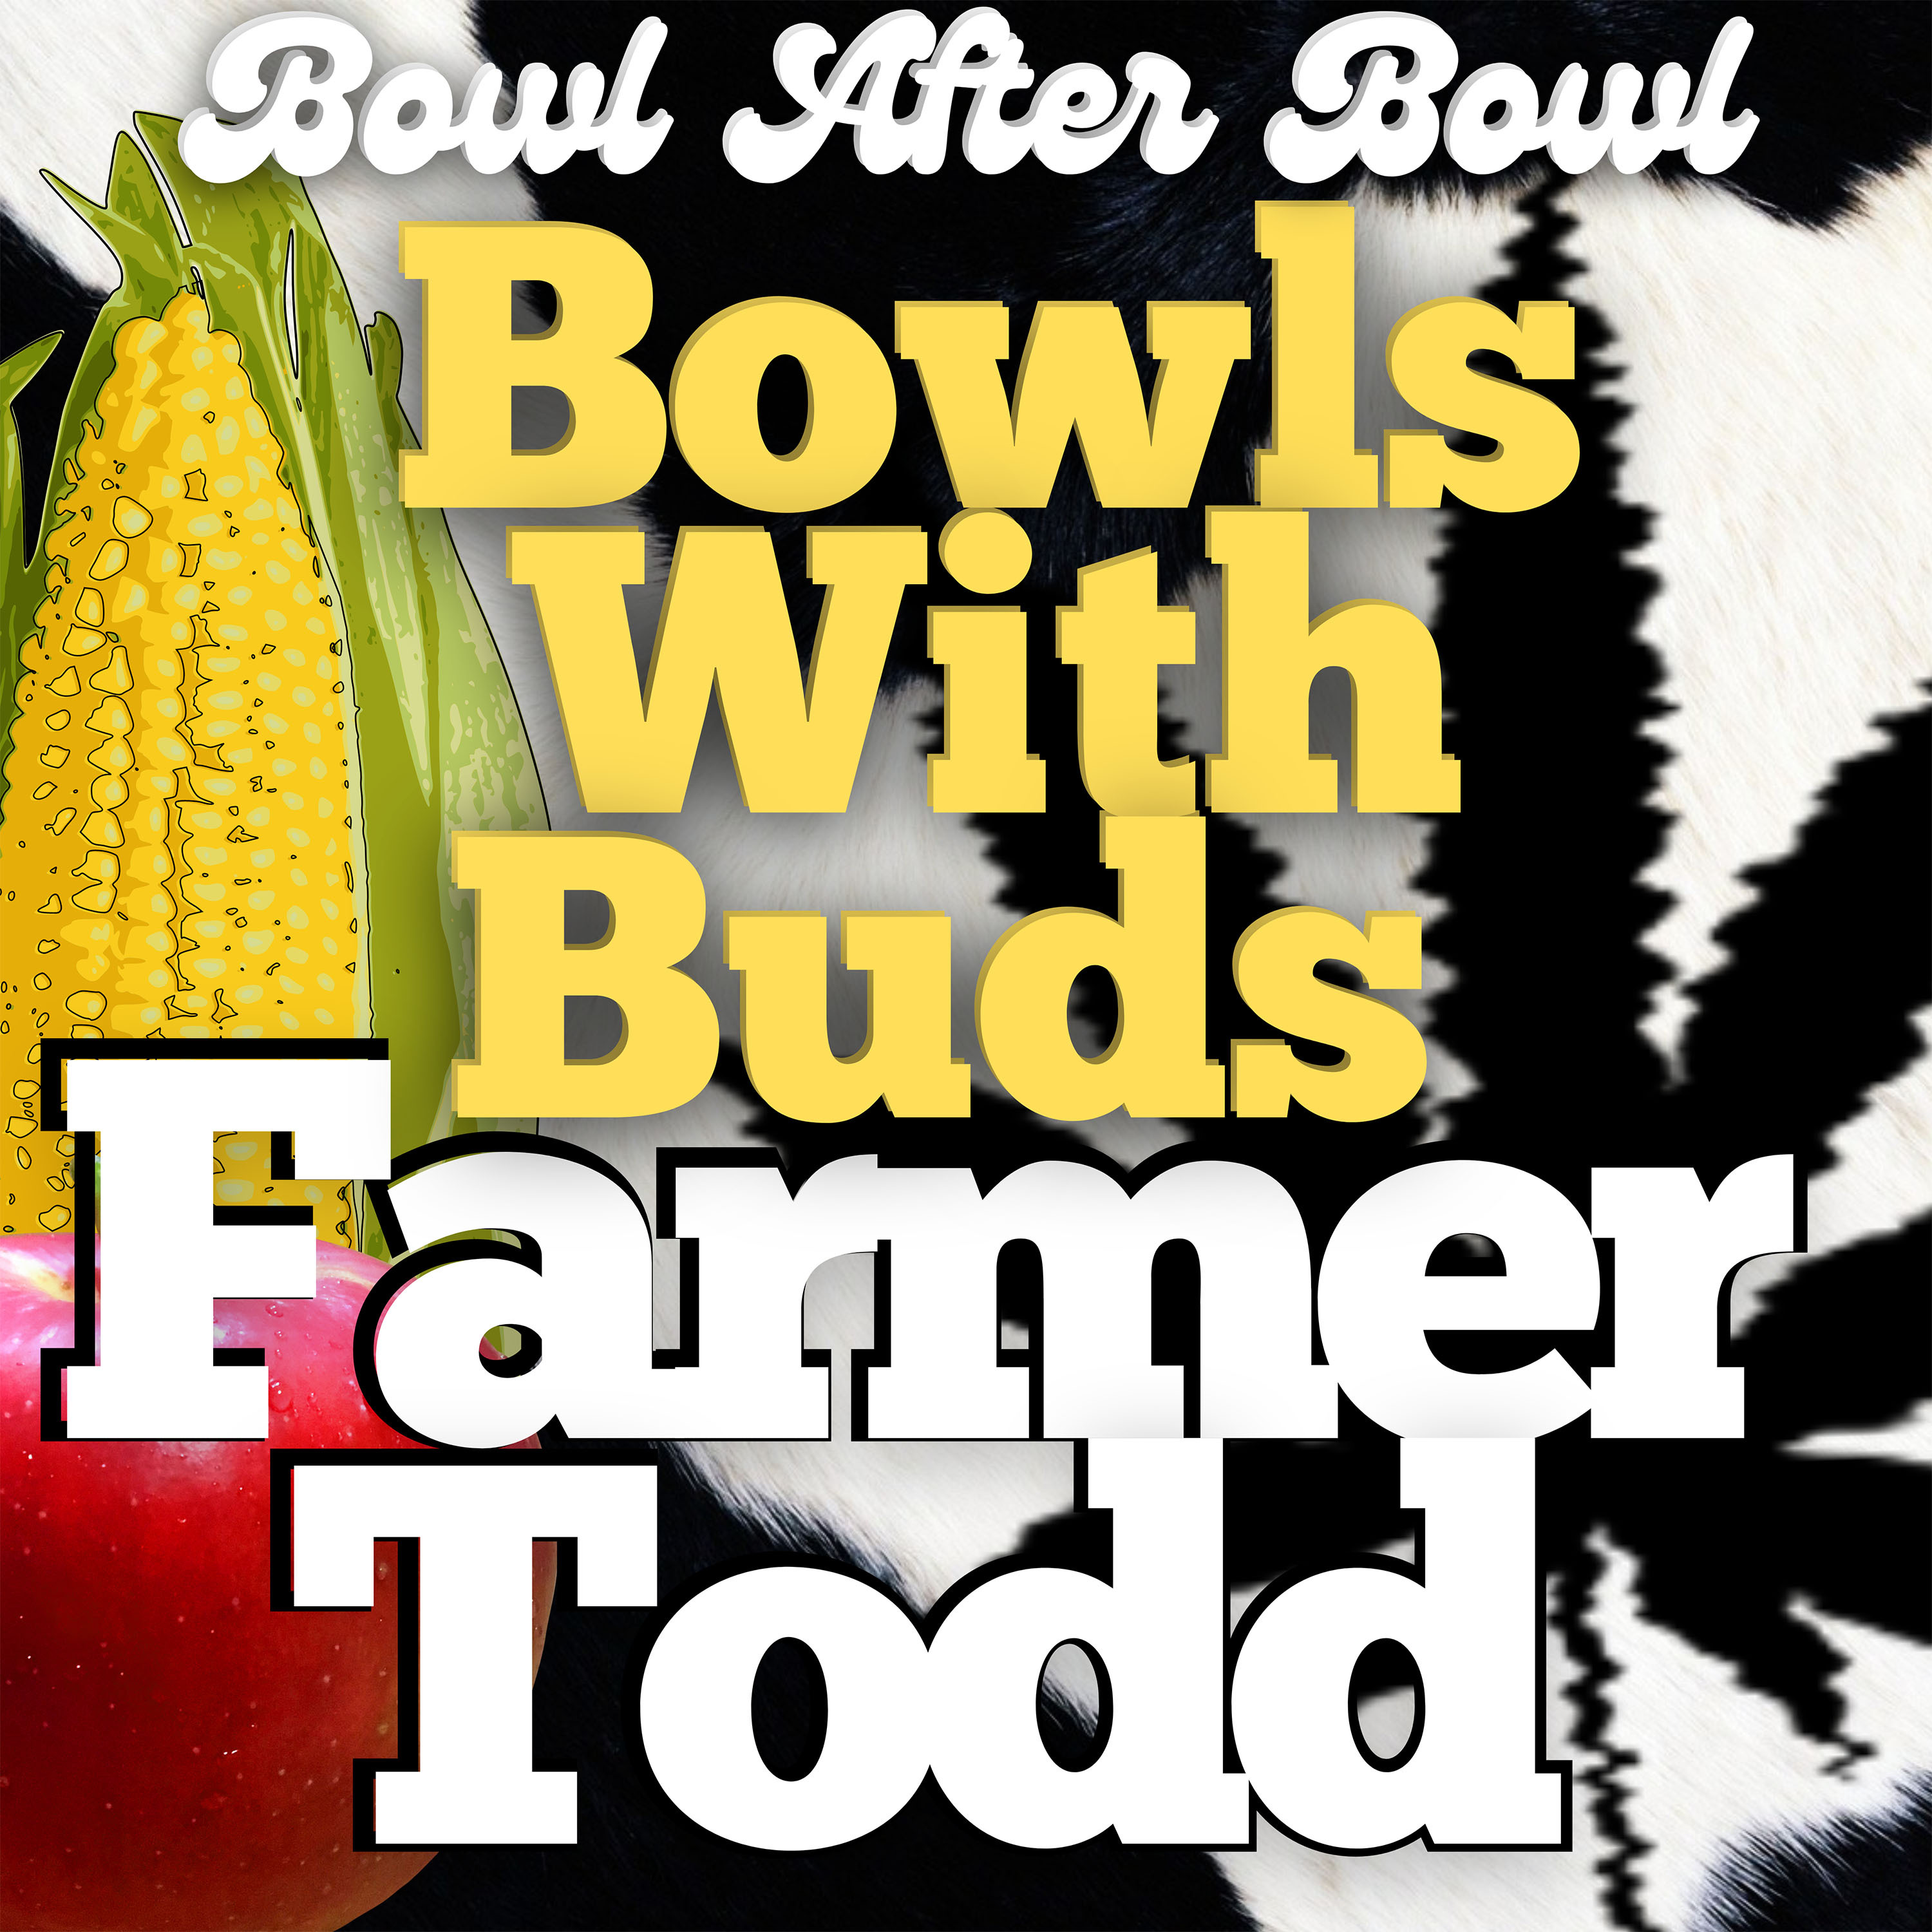 Episode 197 ★ Bowls With Buds ★ Farmer Todd